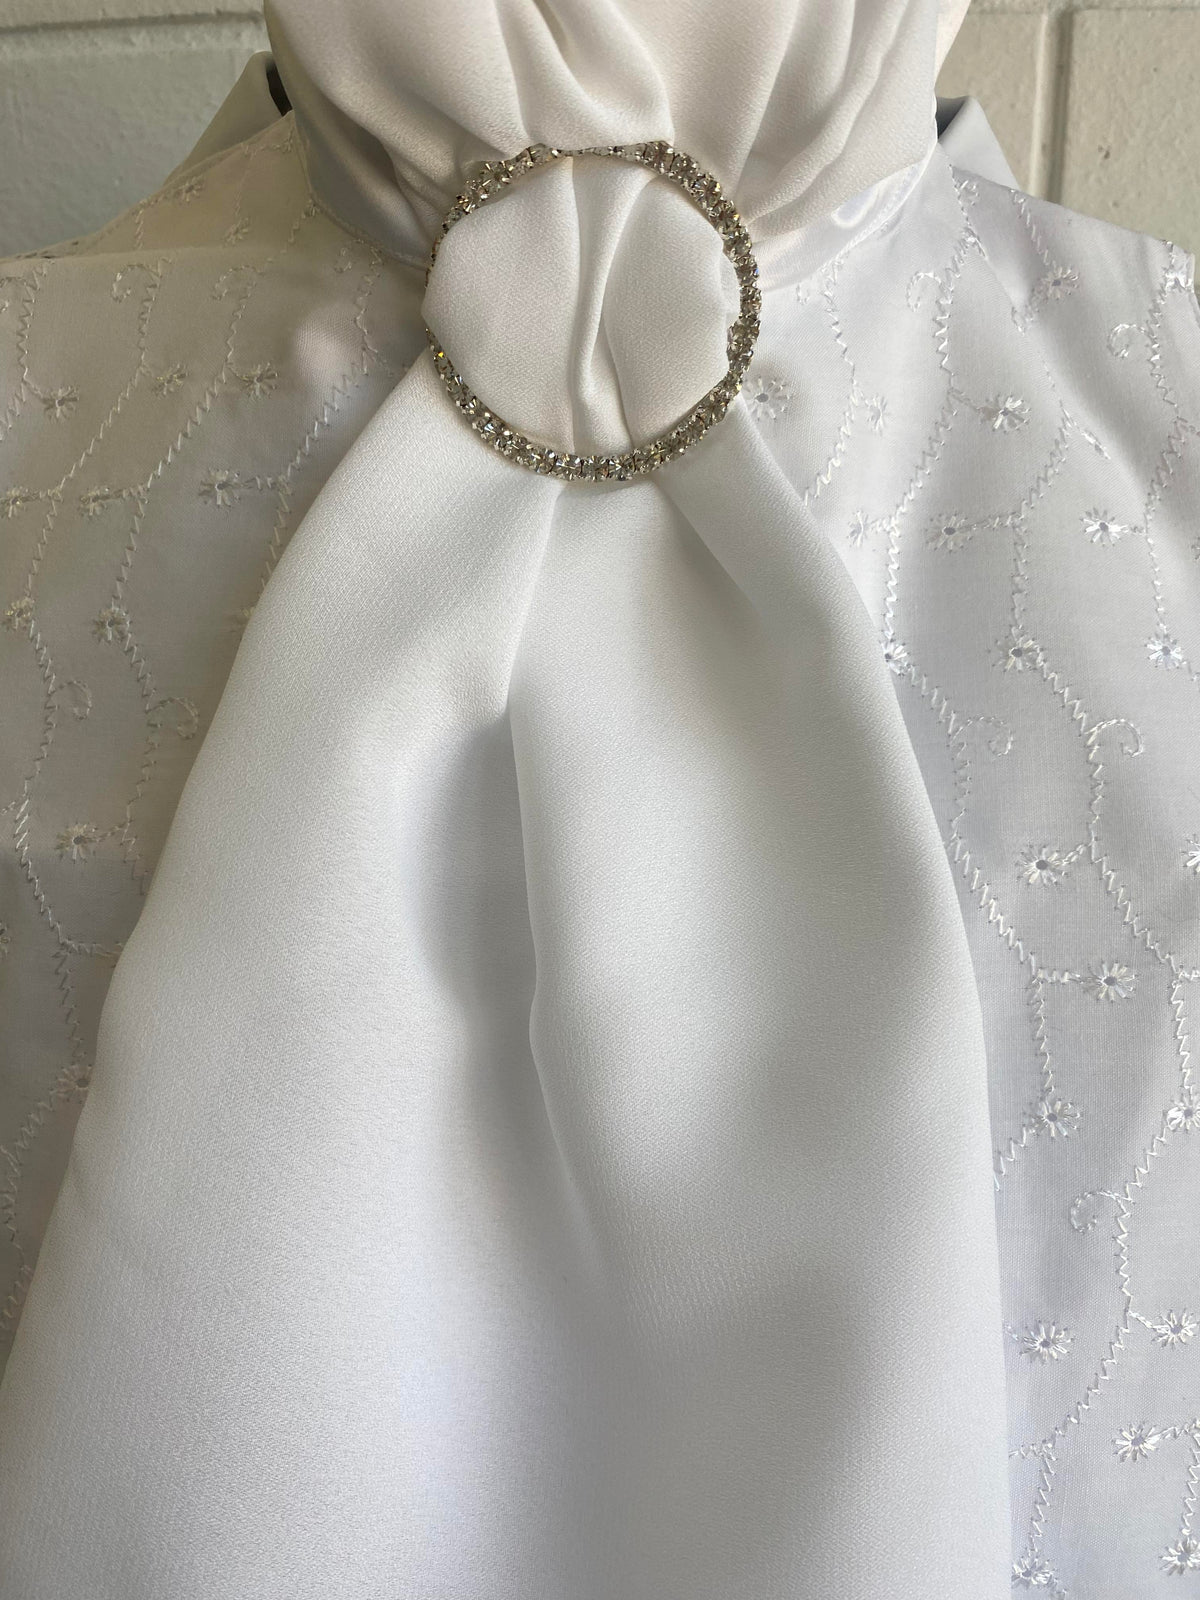 L SHARP Pre-Tied Bib Stock Tie White with Diamanté Ring & Flower Embroidery